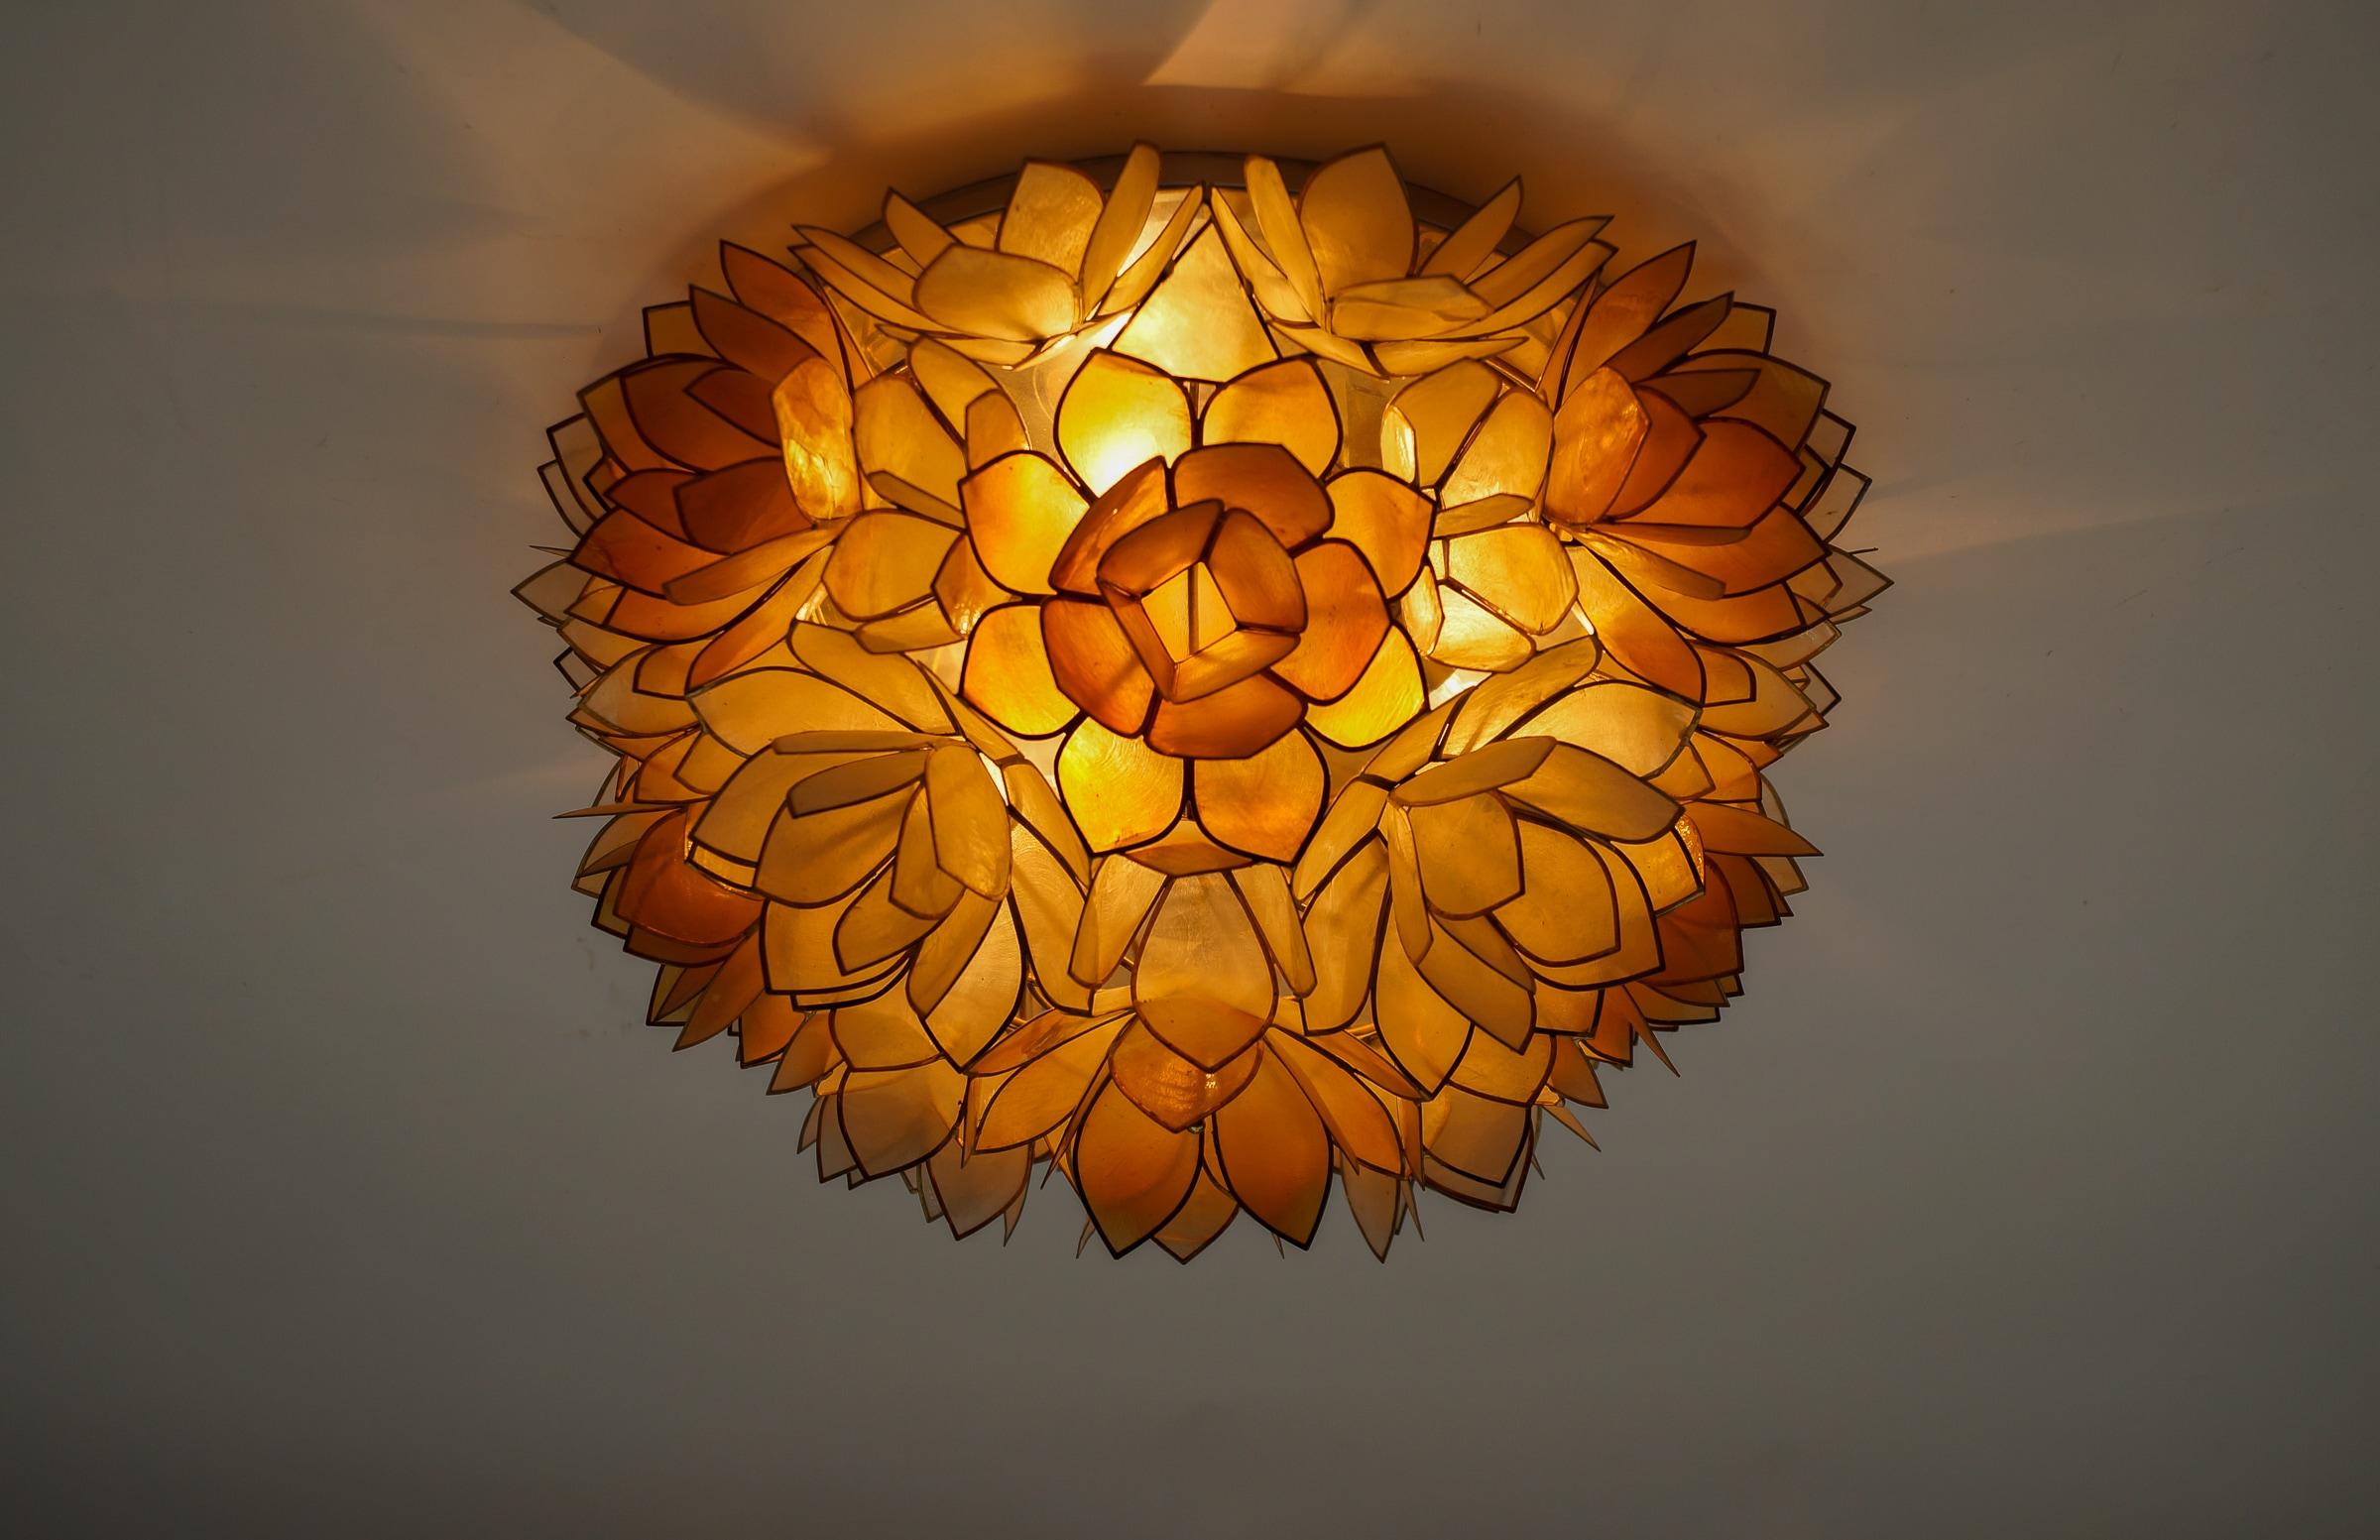 Aluminum Flower Spherical Wall or Ceiling Lamps Made of Mother-of-Pearl in Orange, 1960s For Sale